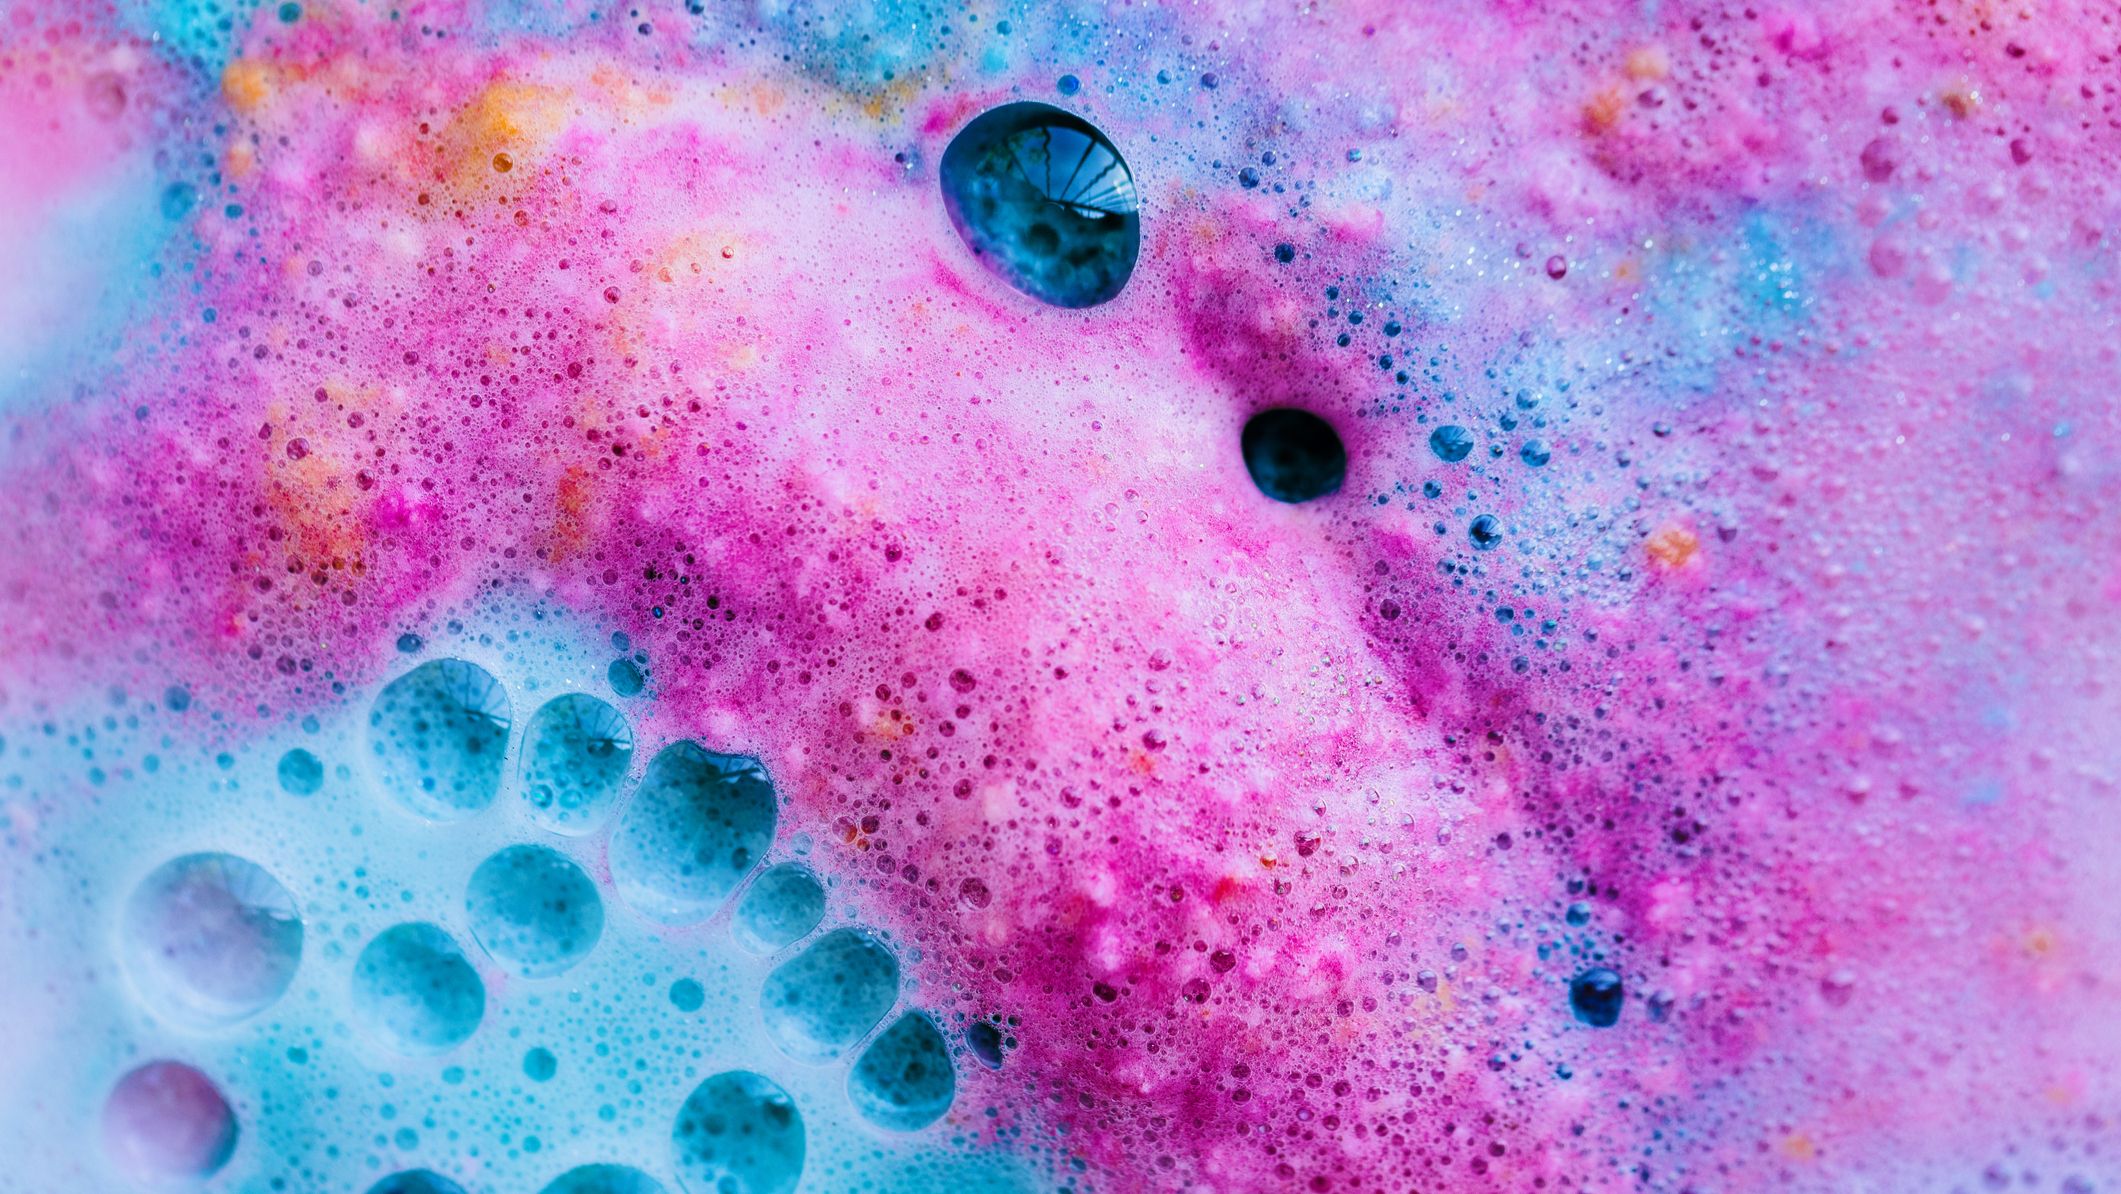 https://hips.hearstapps.com/hmg-prod/images/pink-and-blue-bath-bomb-dissolving-in-the-water-royalty-free-image-1658707351.jpg?crop=1xw:0.84415xh;center,top